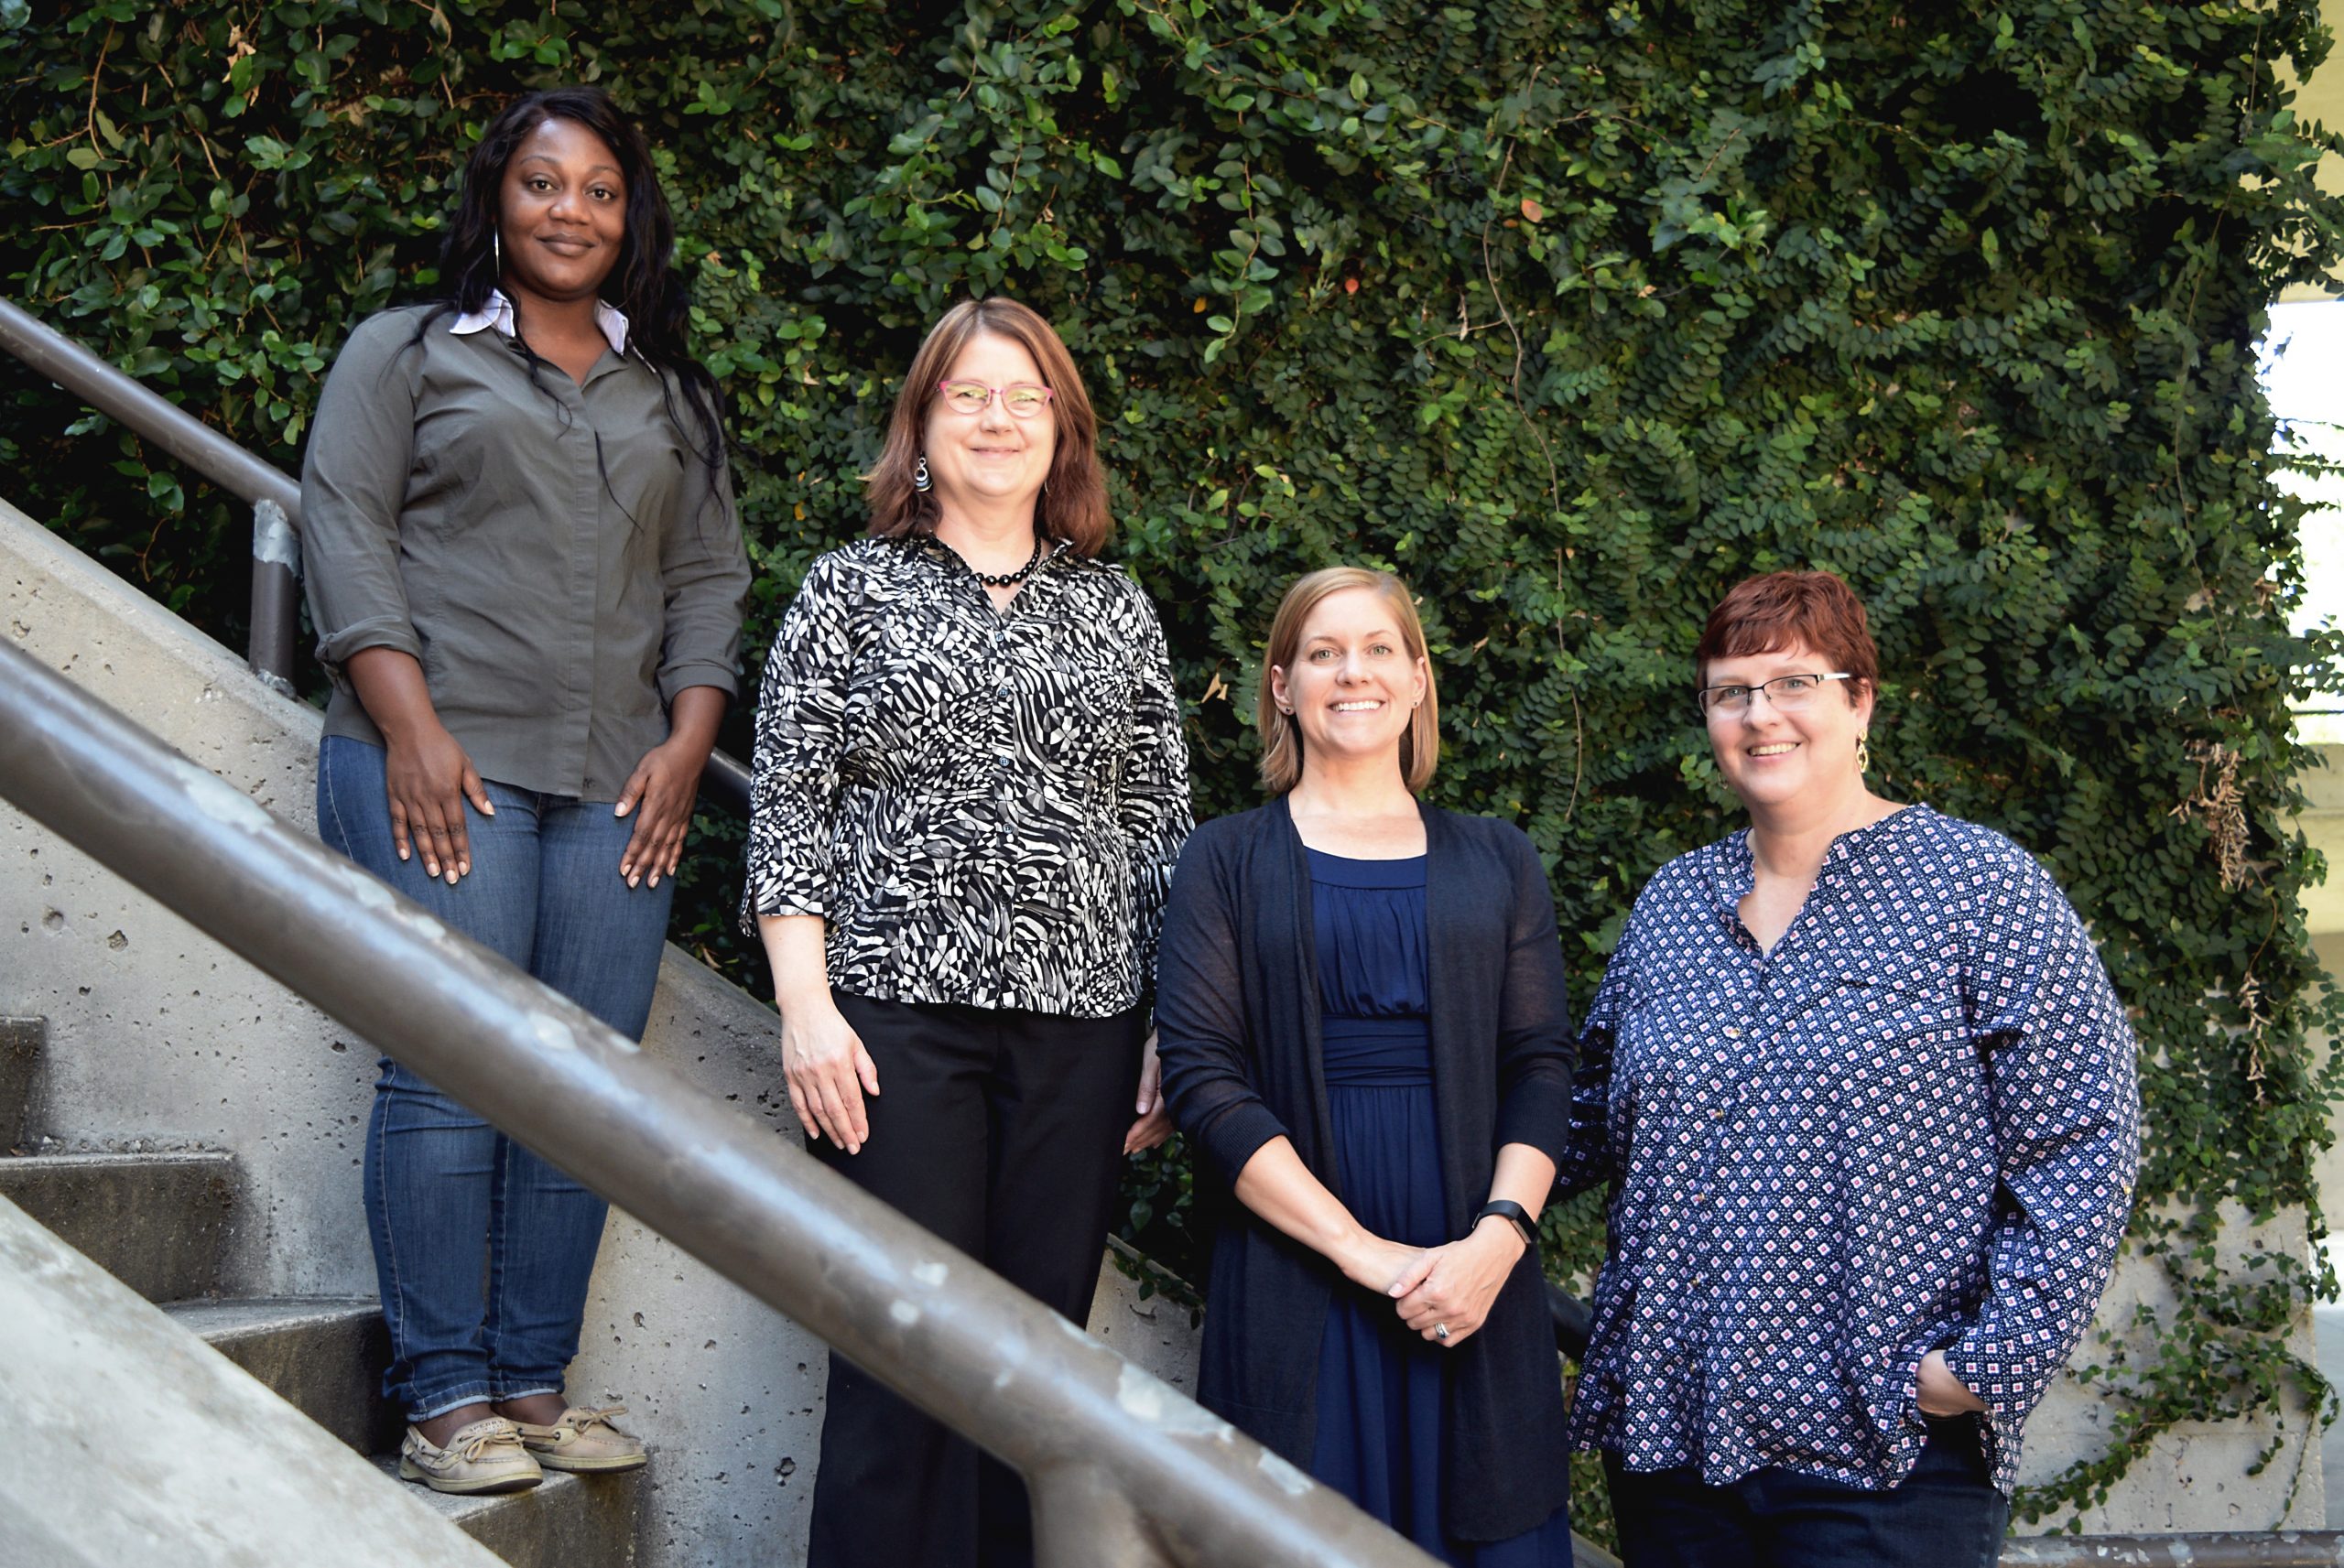 Four women stand on a set of stairs in front of green hedges. They each look at the camera, smiling.